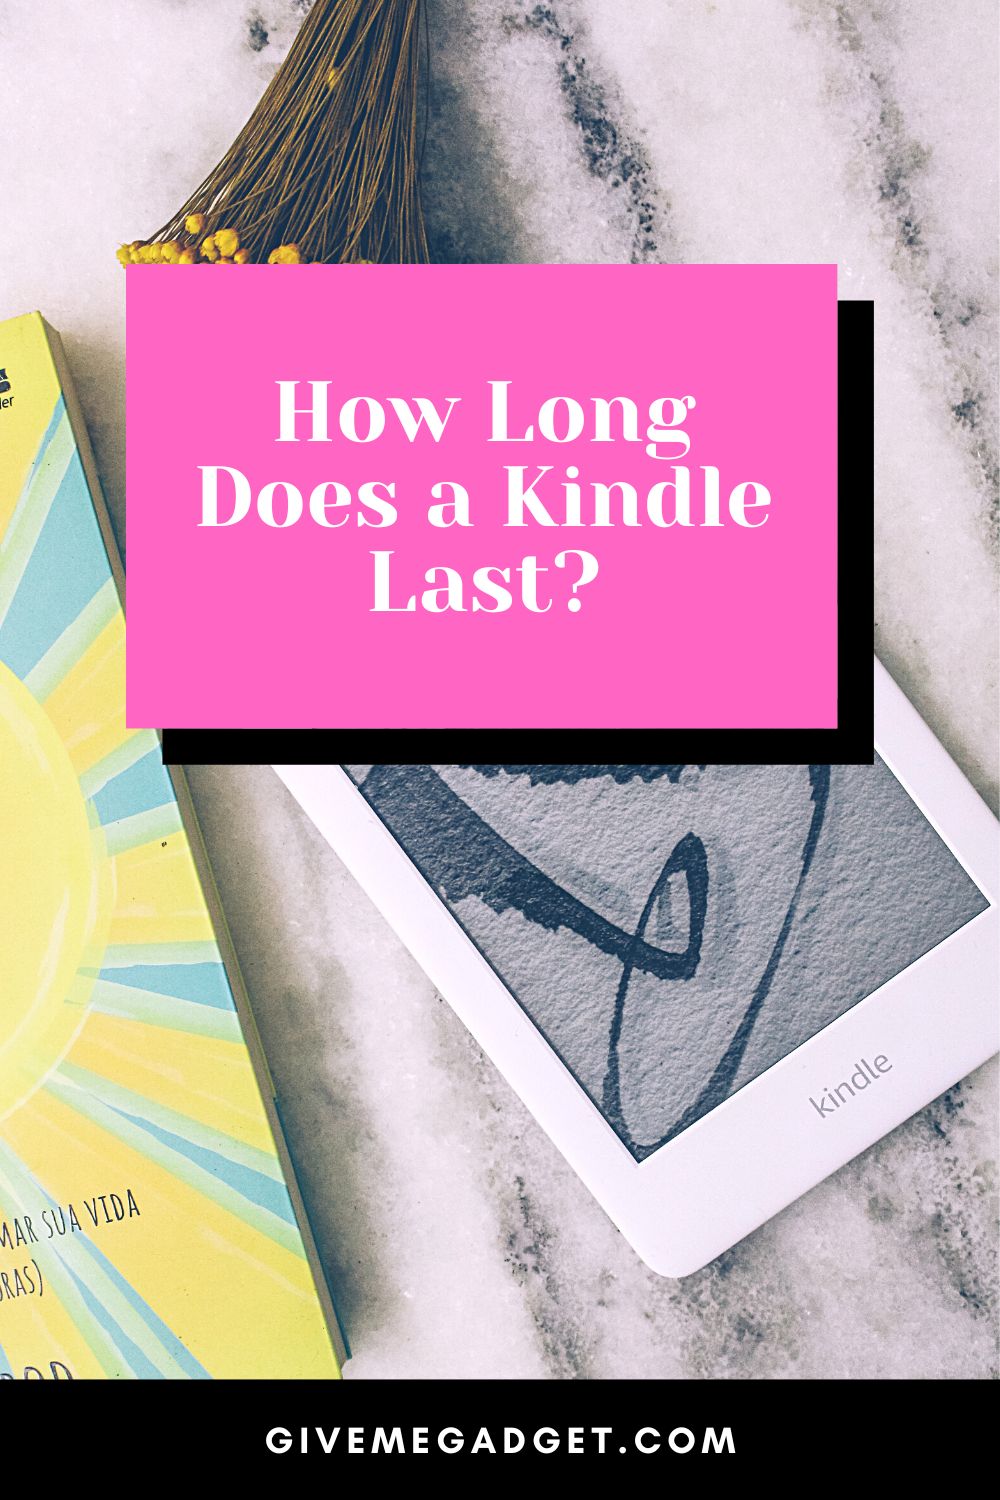 How Long Does a Kindle Last?